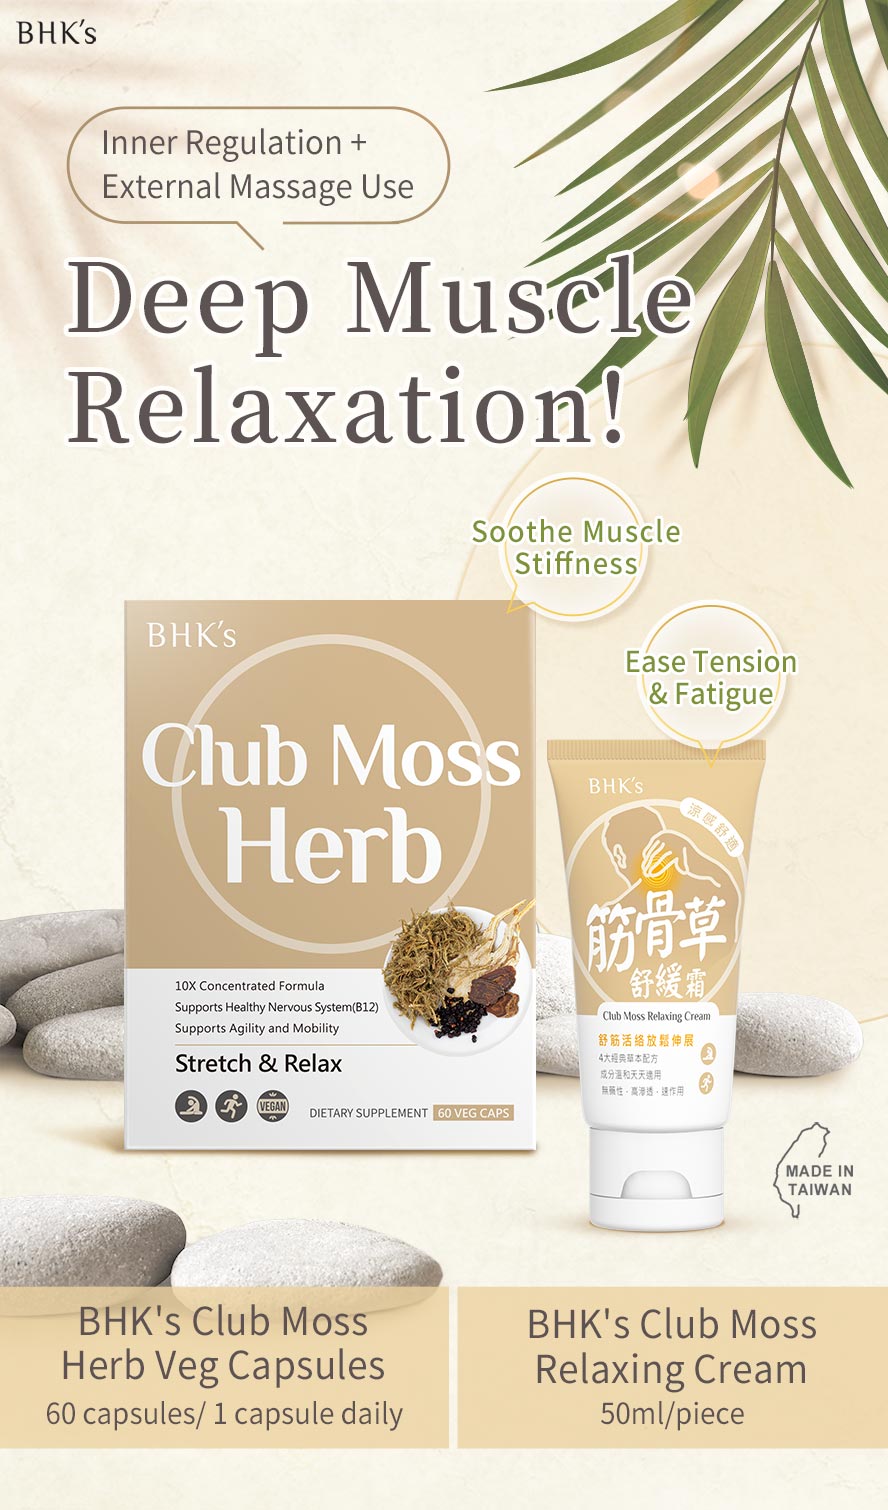 BHK's Club Moss Capsules + Relaxing Cream give deep muscle relaxation, ease tension and fatigue.